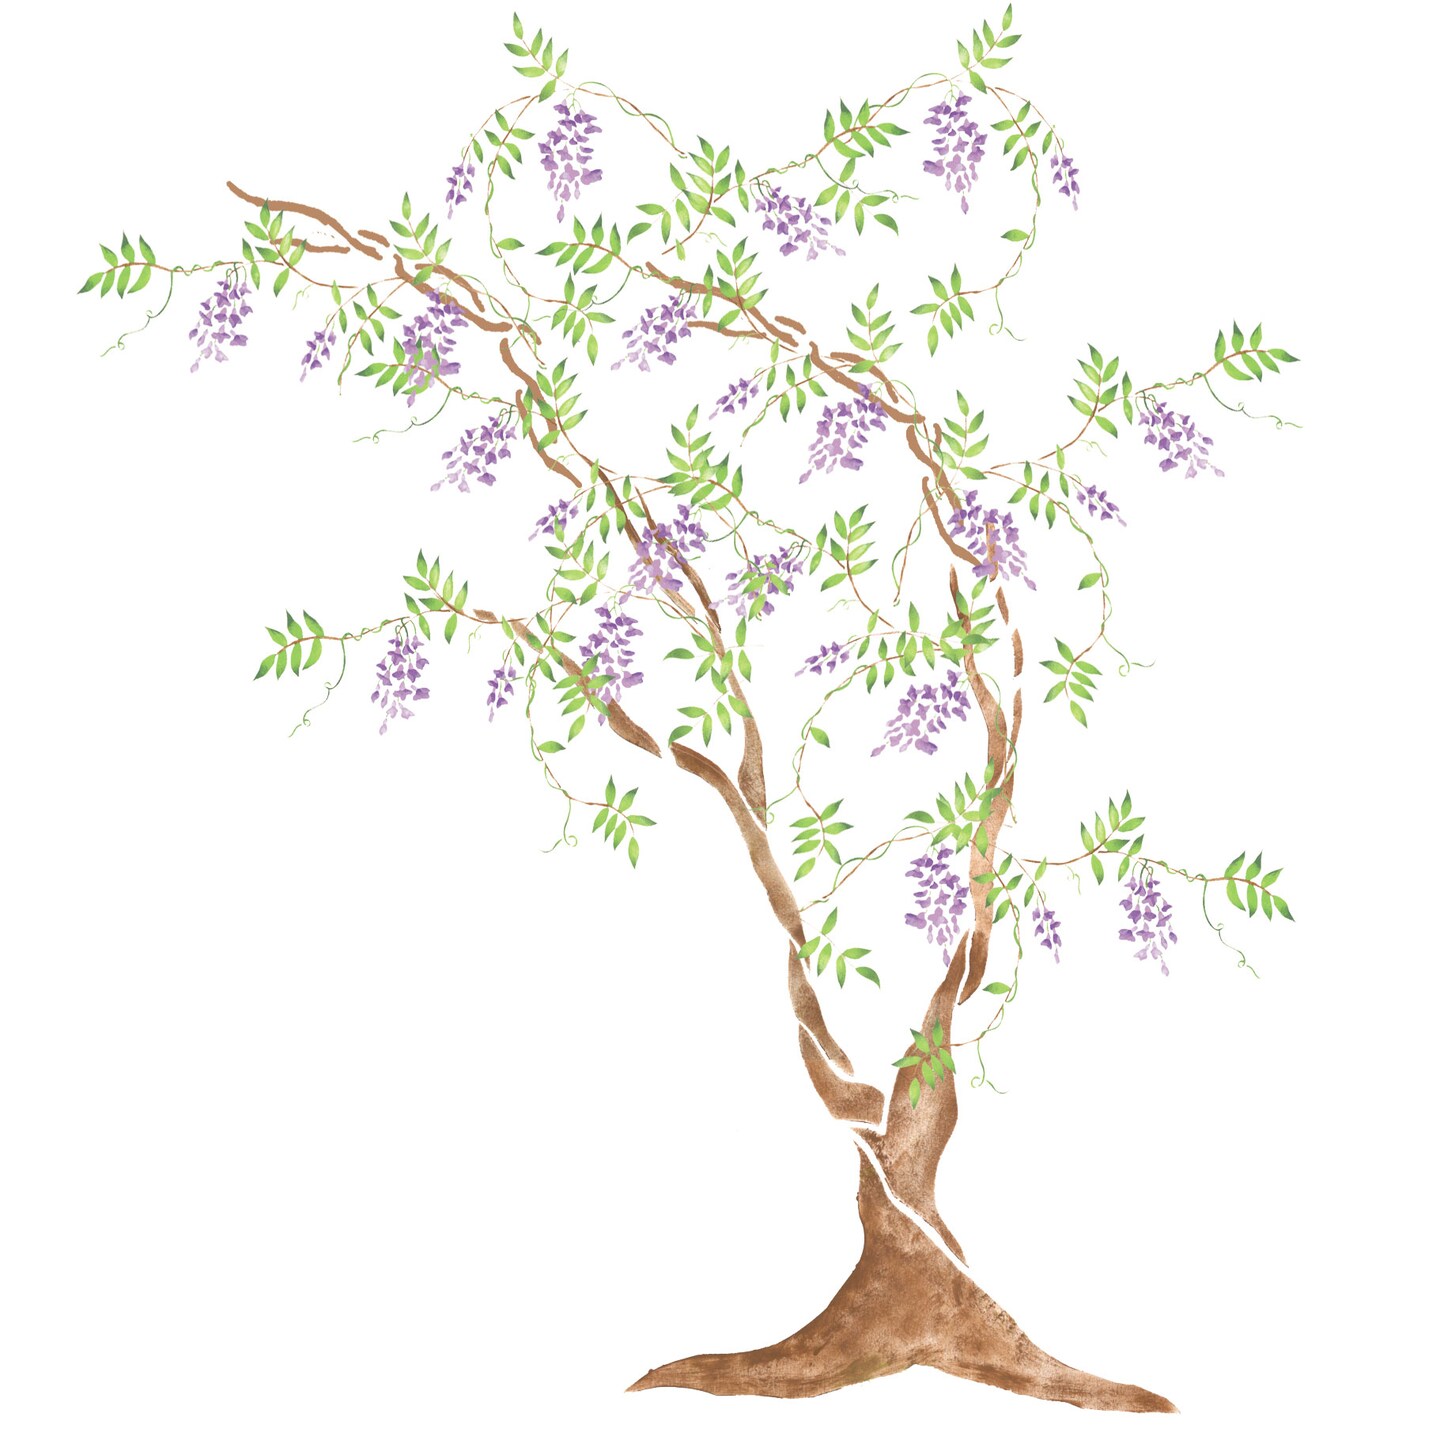 Wisteria Tree Wall Stencil | 2904 by Designer Stencils | Animal &#x26; Nature Stencils | Reusable Art Craft Stencils for Painting on Walls, Canvas, Wood | Reusable Plastic Paint Stencil for Home Makeover | Easy to Use &#x26; Clean Art Stencil